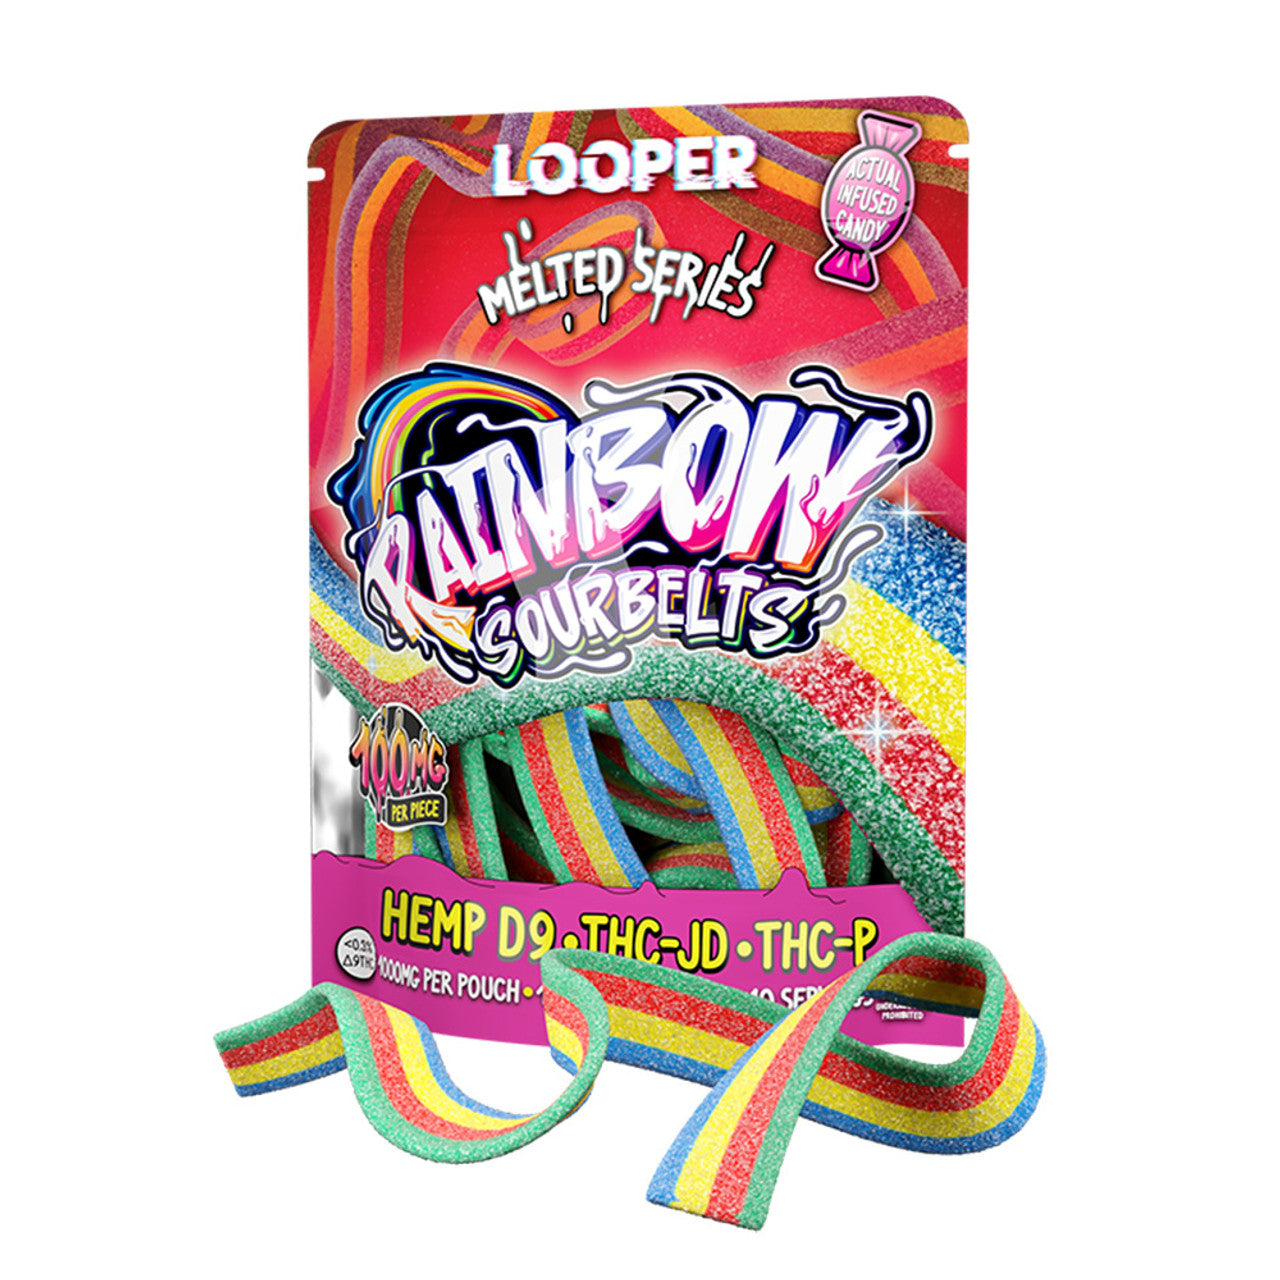 Looper Melted Series D9/THC-JD/THC-P 1000mg Sour Belts